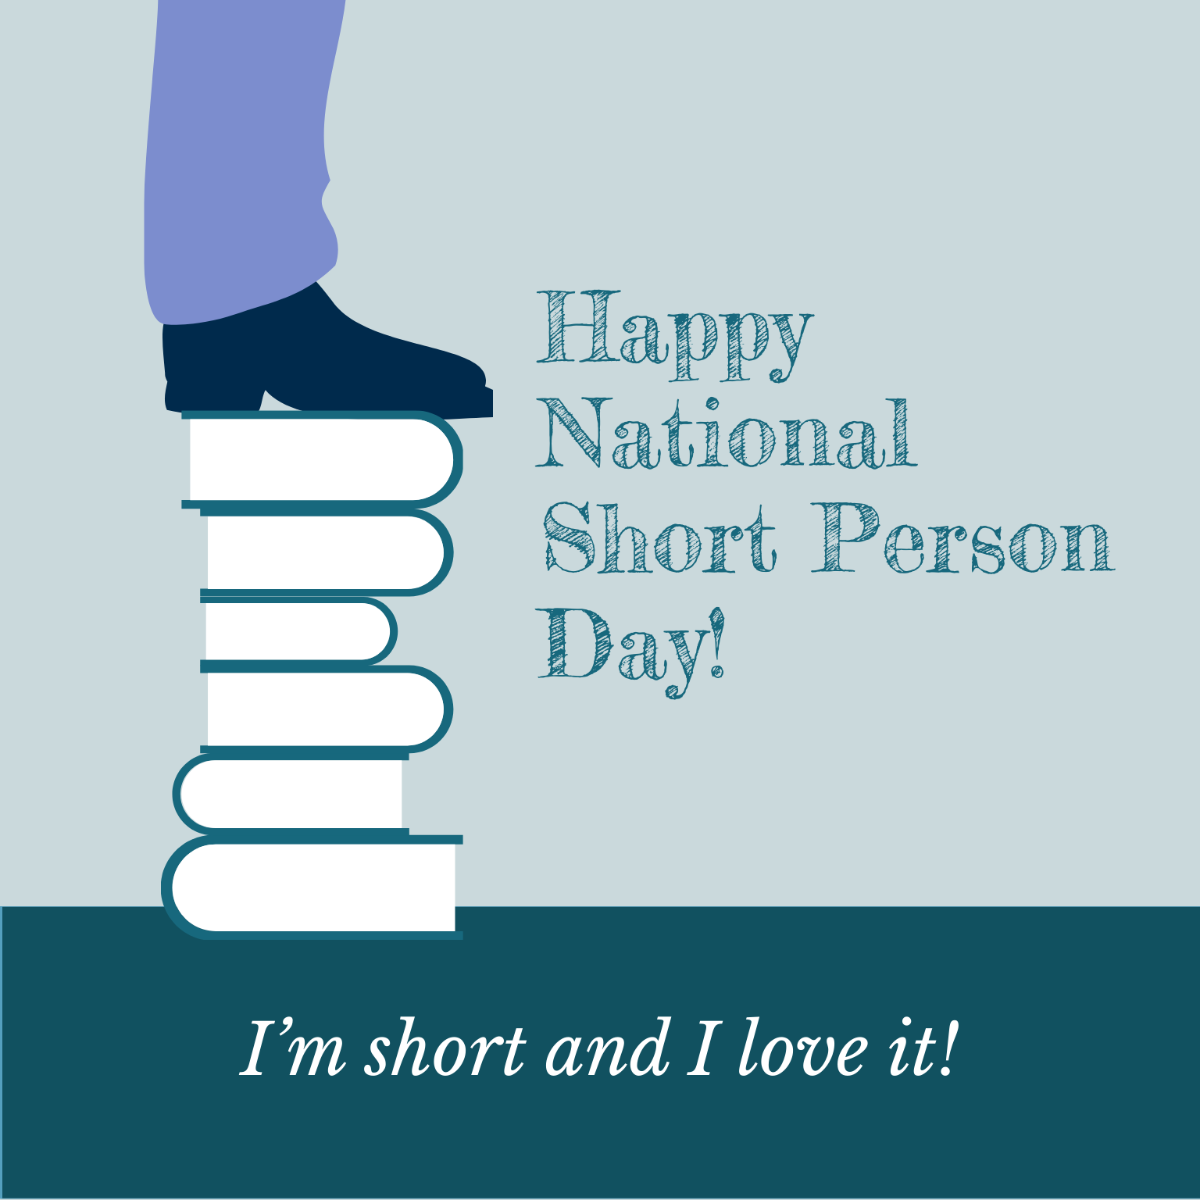 National Short Person Day Poster Vector Template